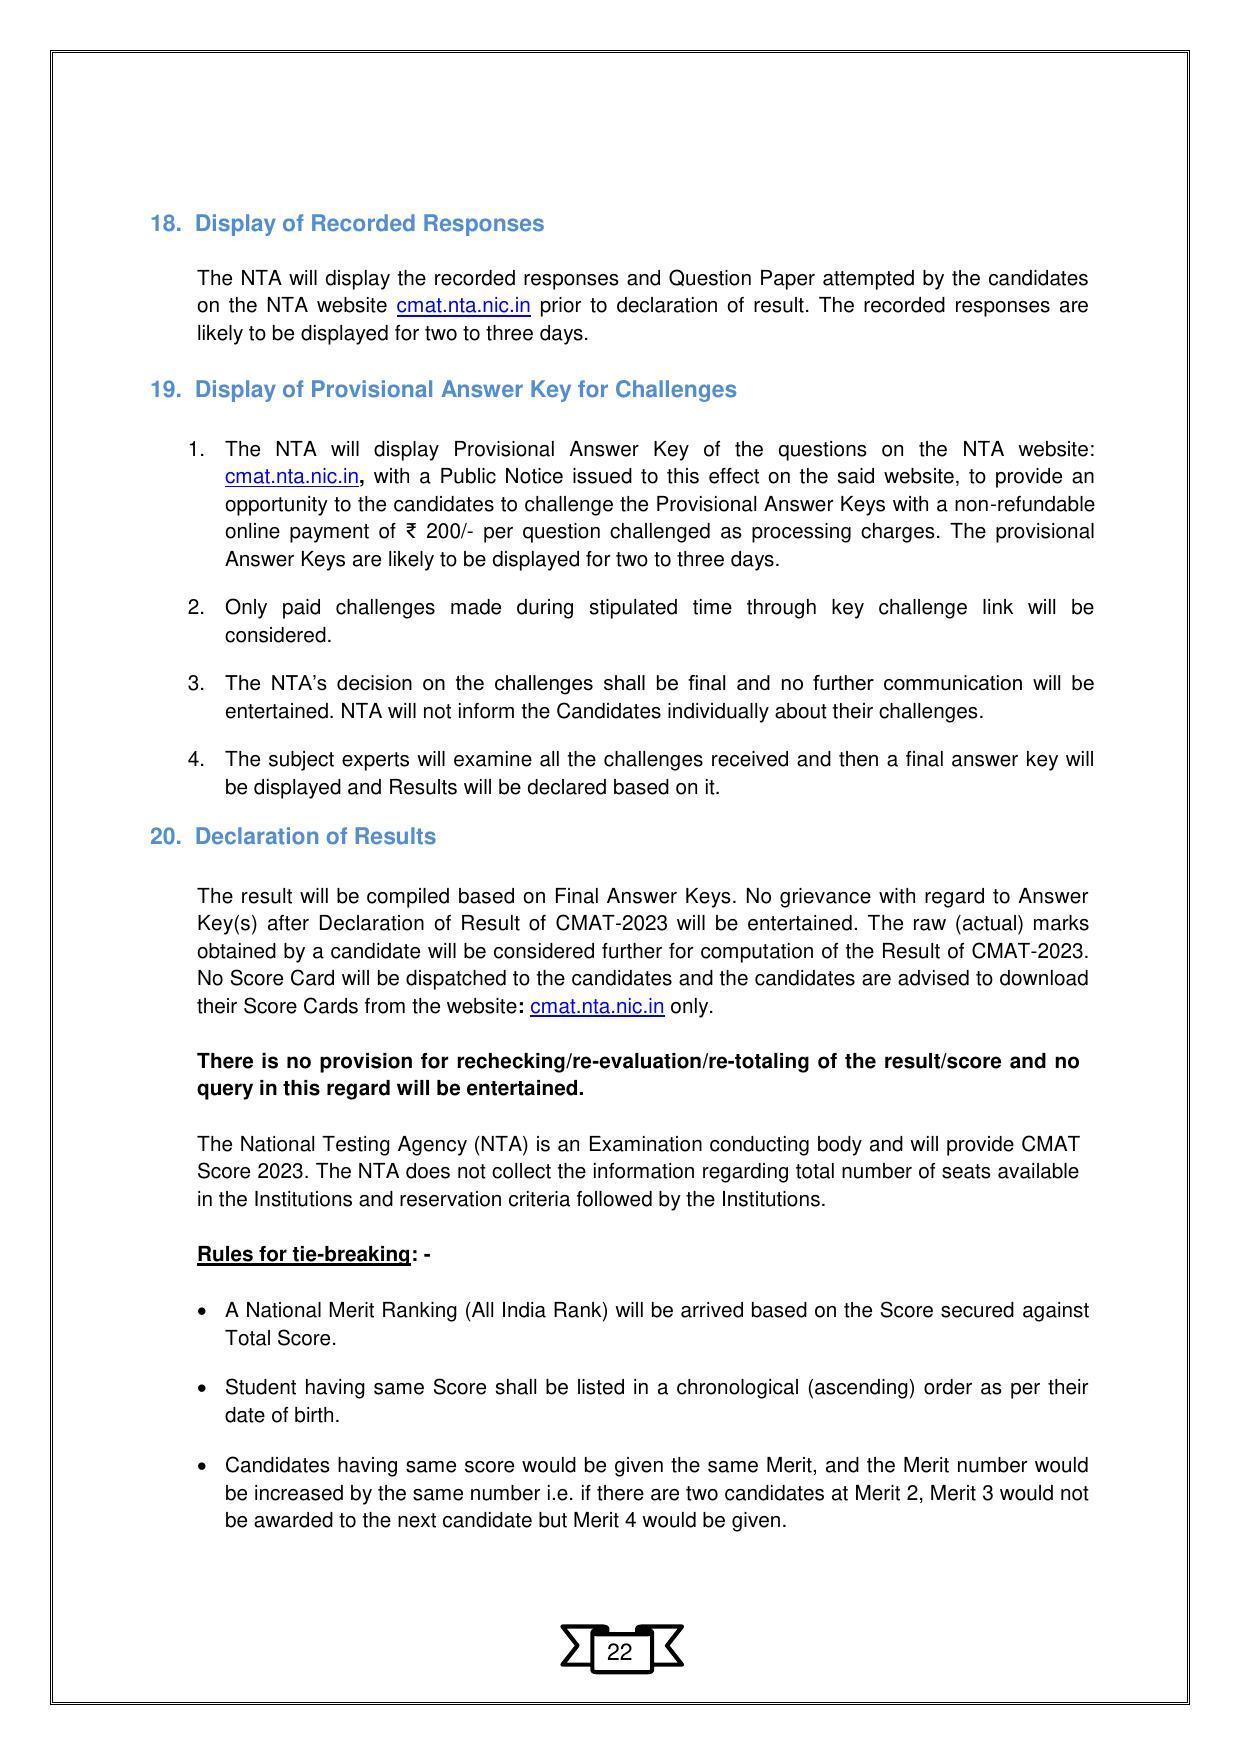 CMAT 2023 Information Bulletin - Page 25